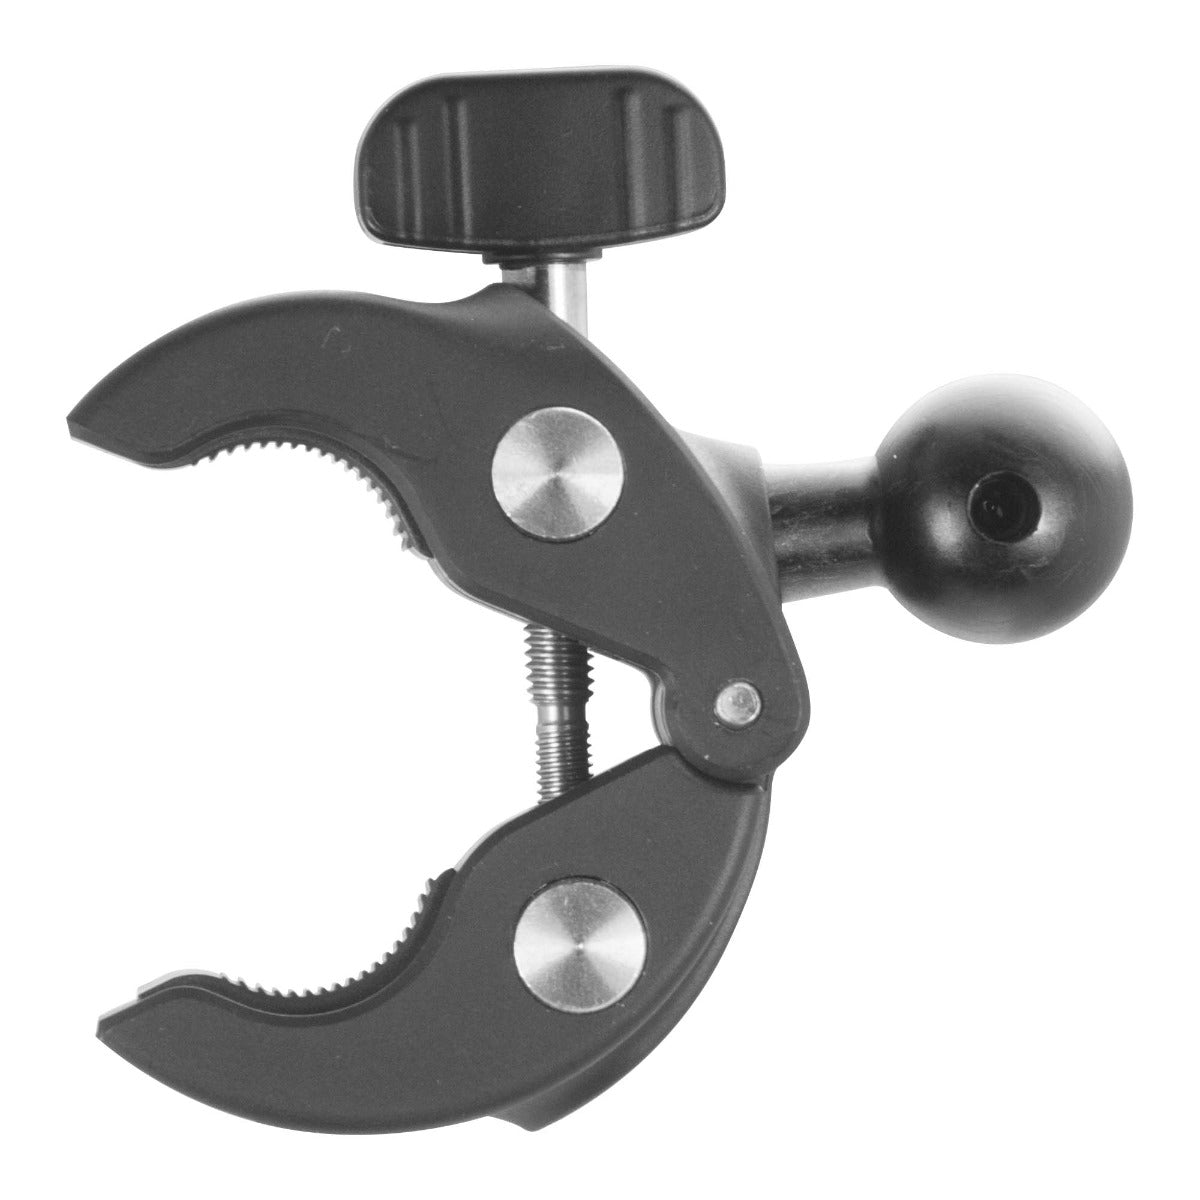 iBOLT™ 22mm Clamp Mount for Handlebars, poles, posts